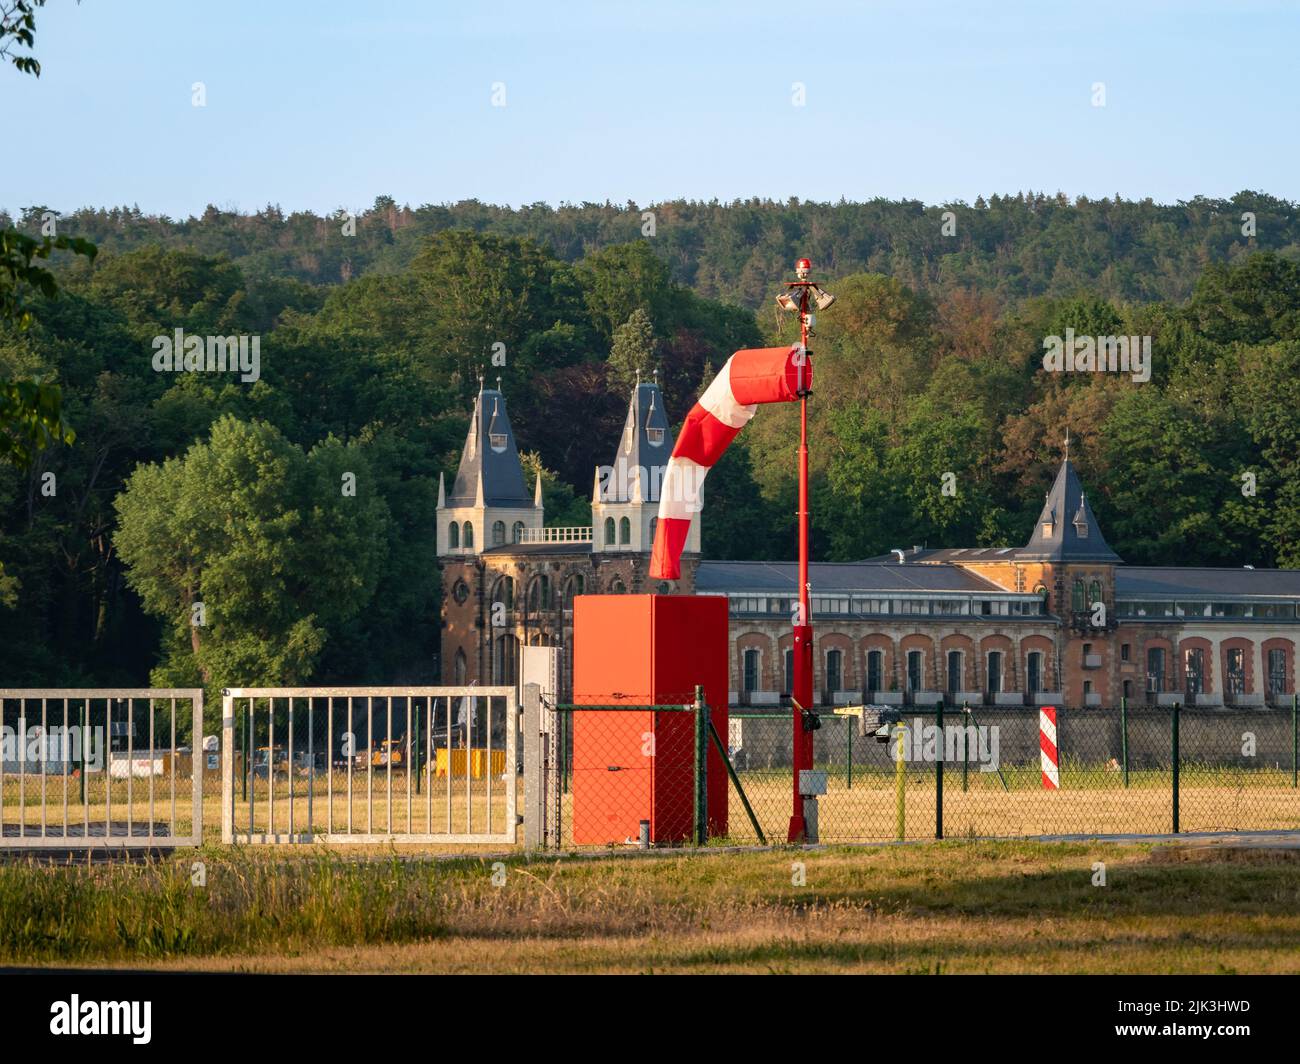 Windsock hanging on a pole. Equipment for measuring the wind speed and direction. Measurement station to monitor the weather (meteorology). Stock Photo